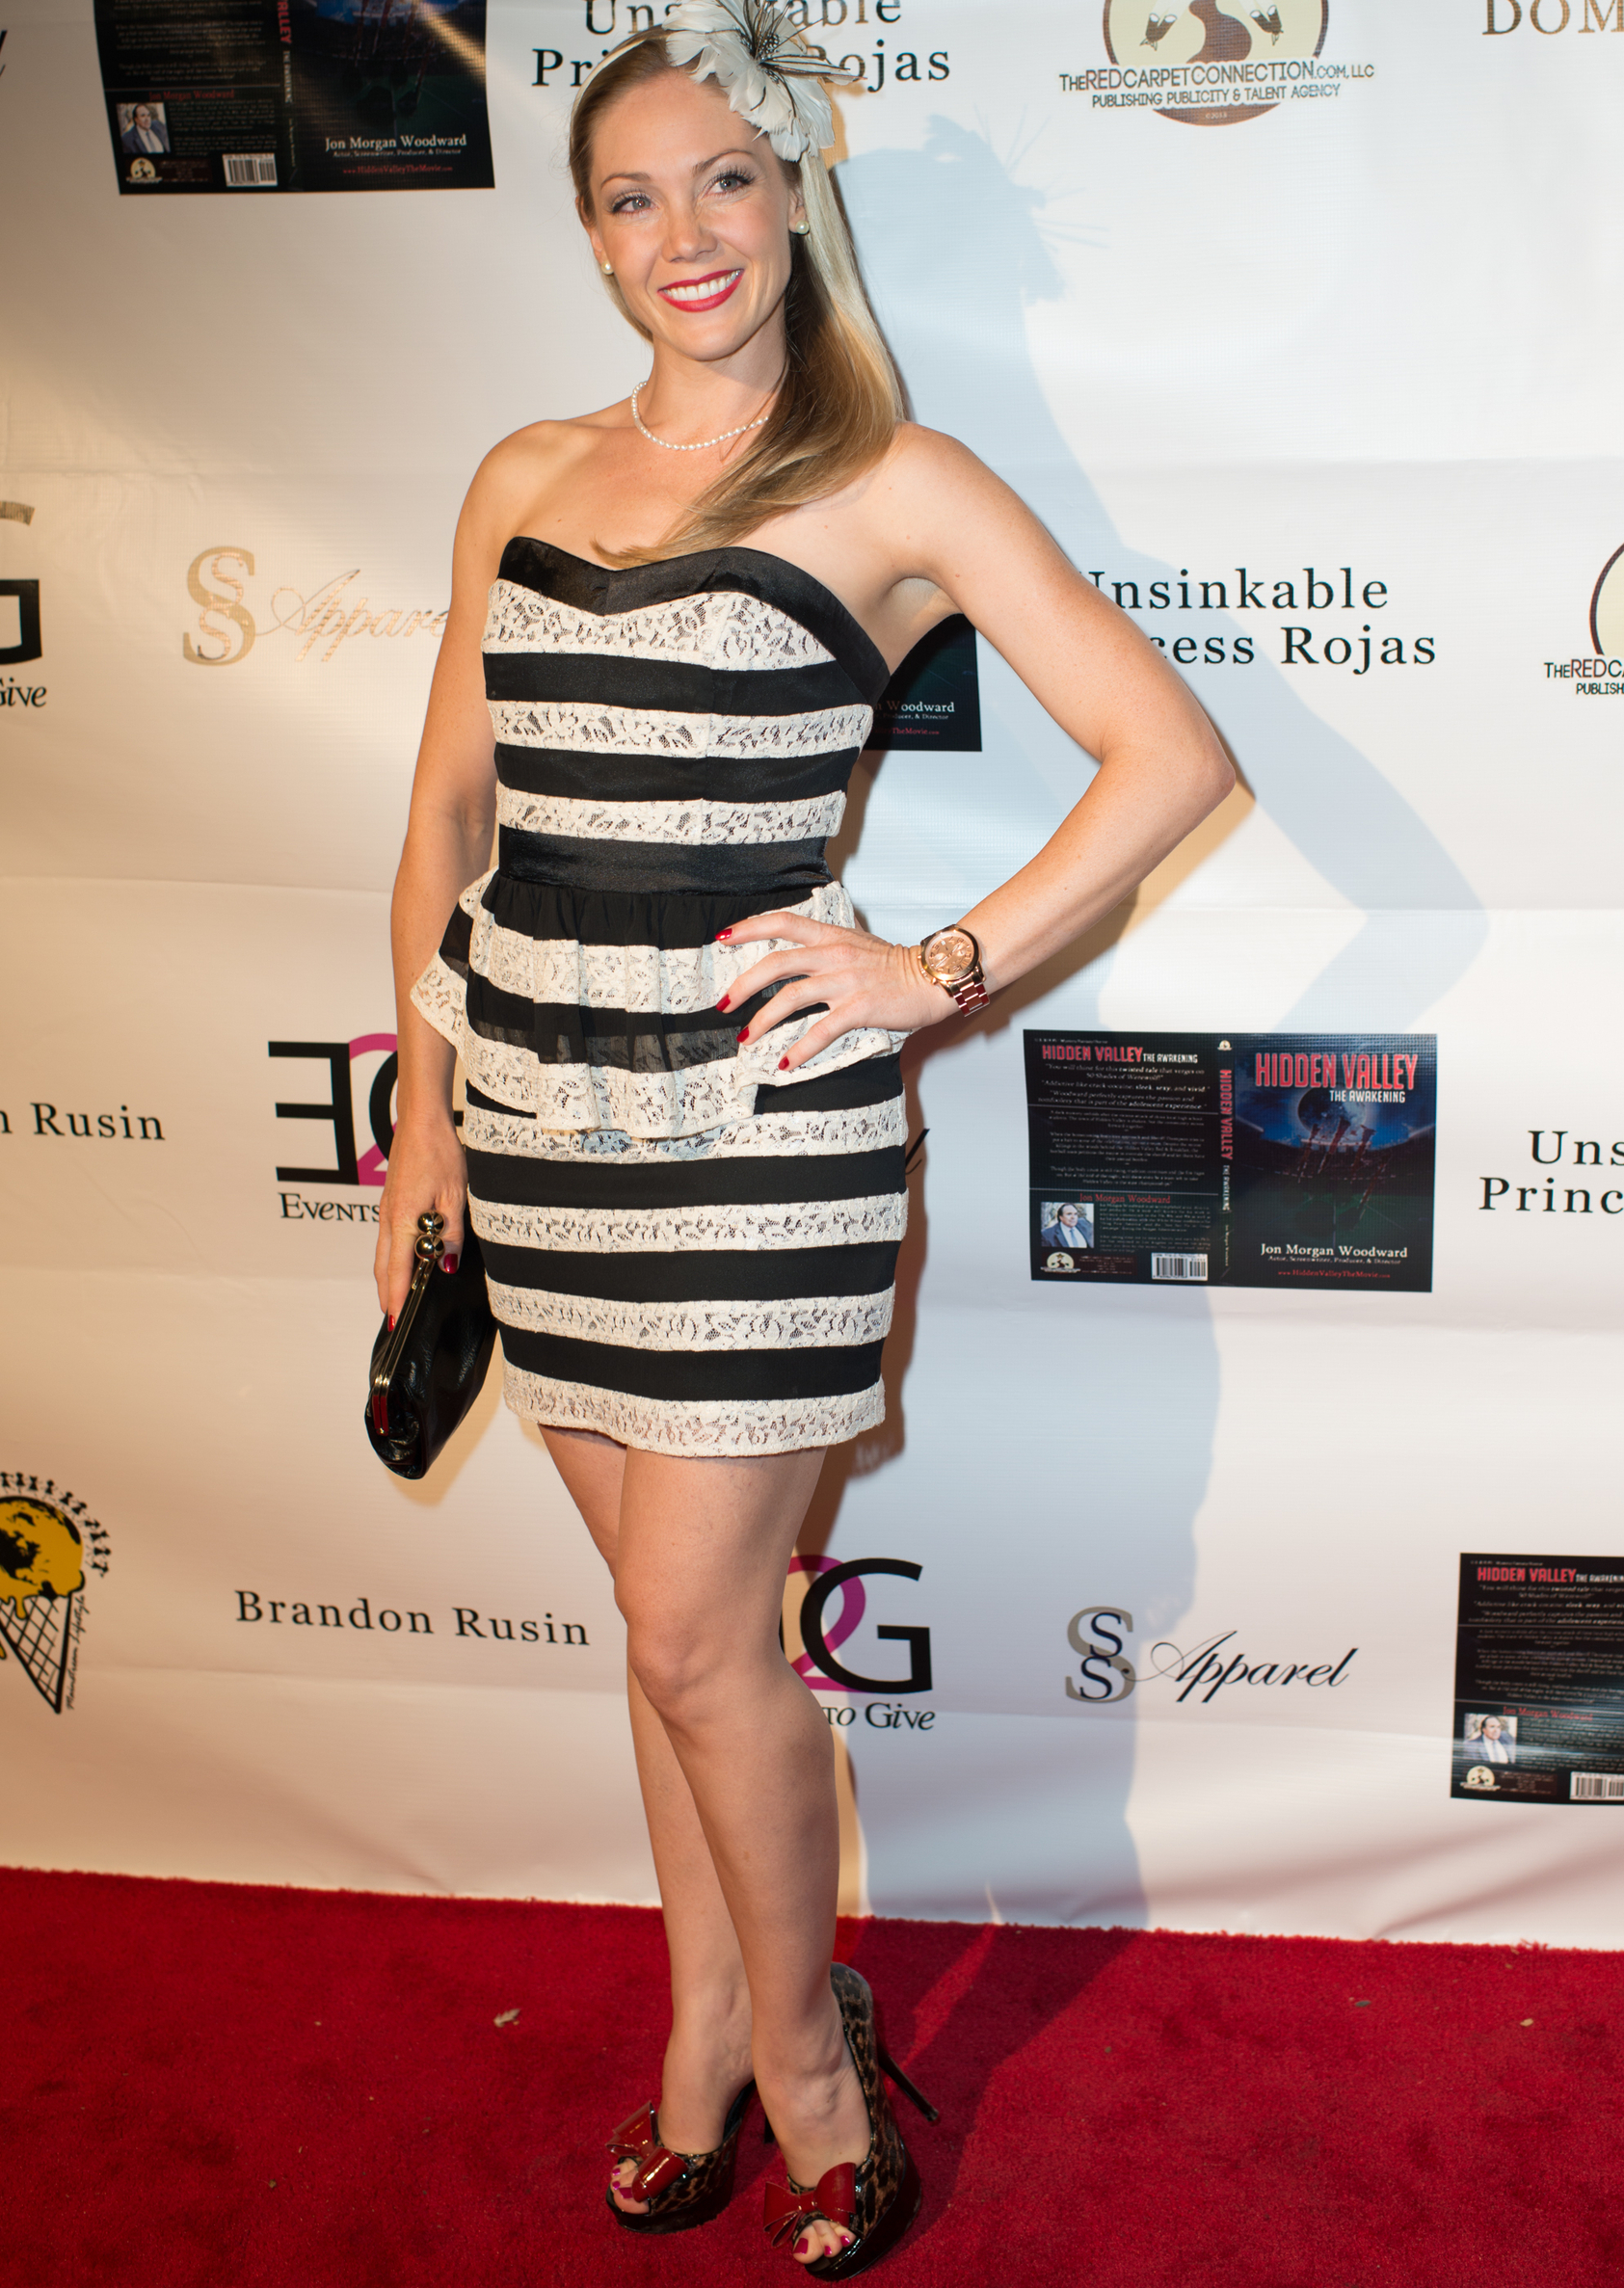 On the red carpet at the Hidden Valley book launch/press event